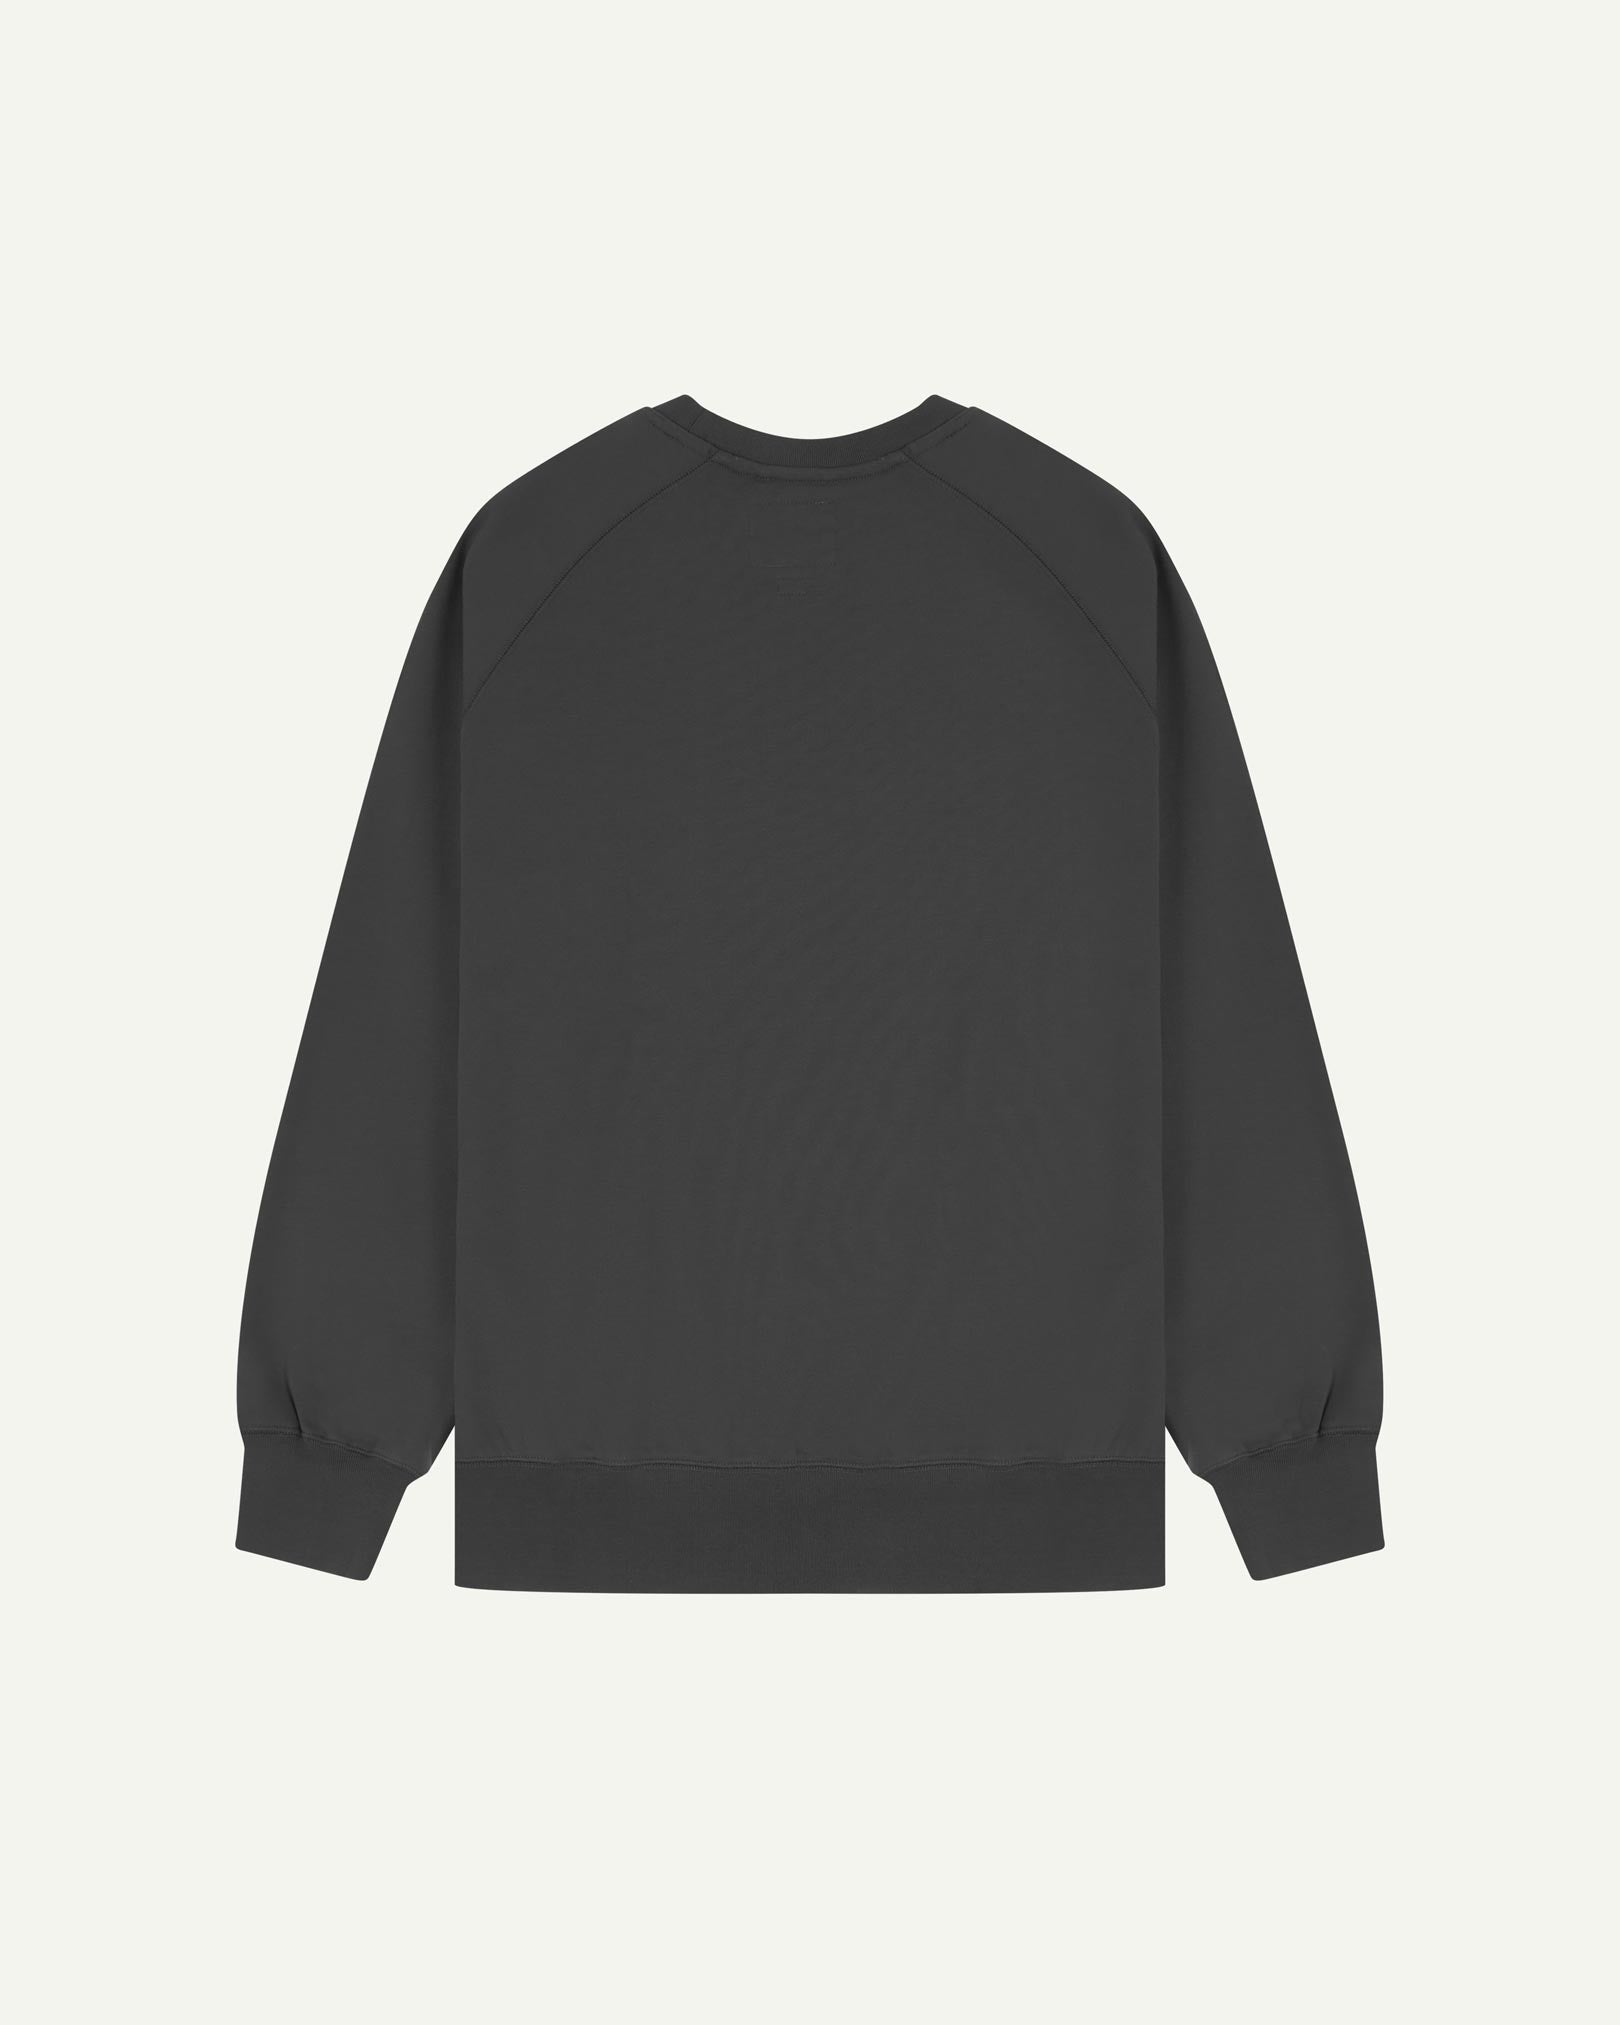 Back view of men's faded black organic heavyweight cotton 7005 jersey sweatshirt by Uskees, showing ribbed cuffs and hem.